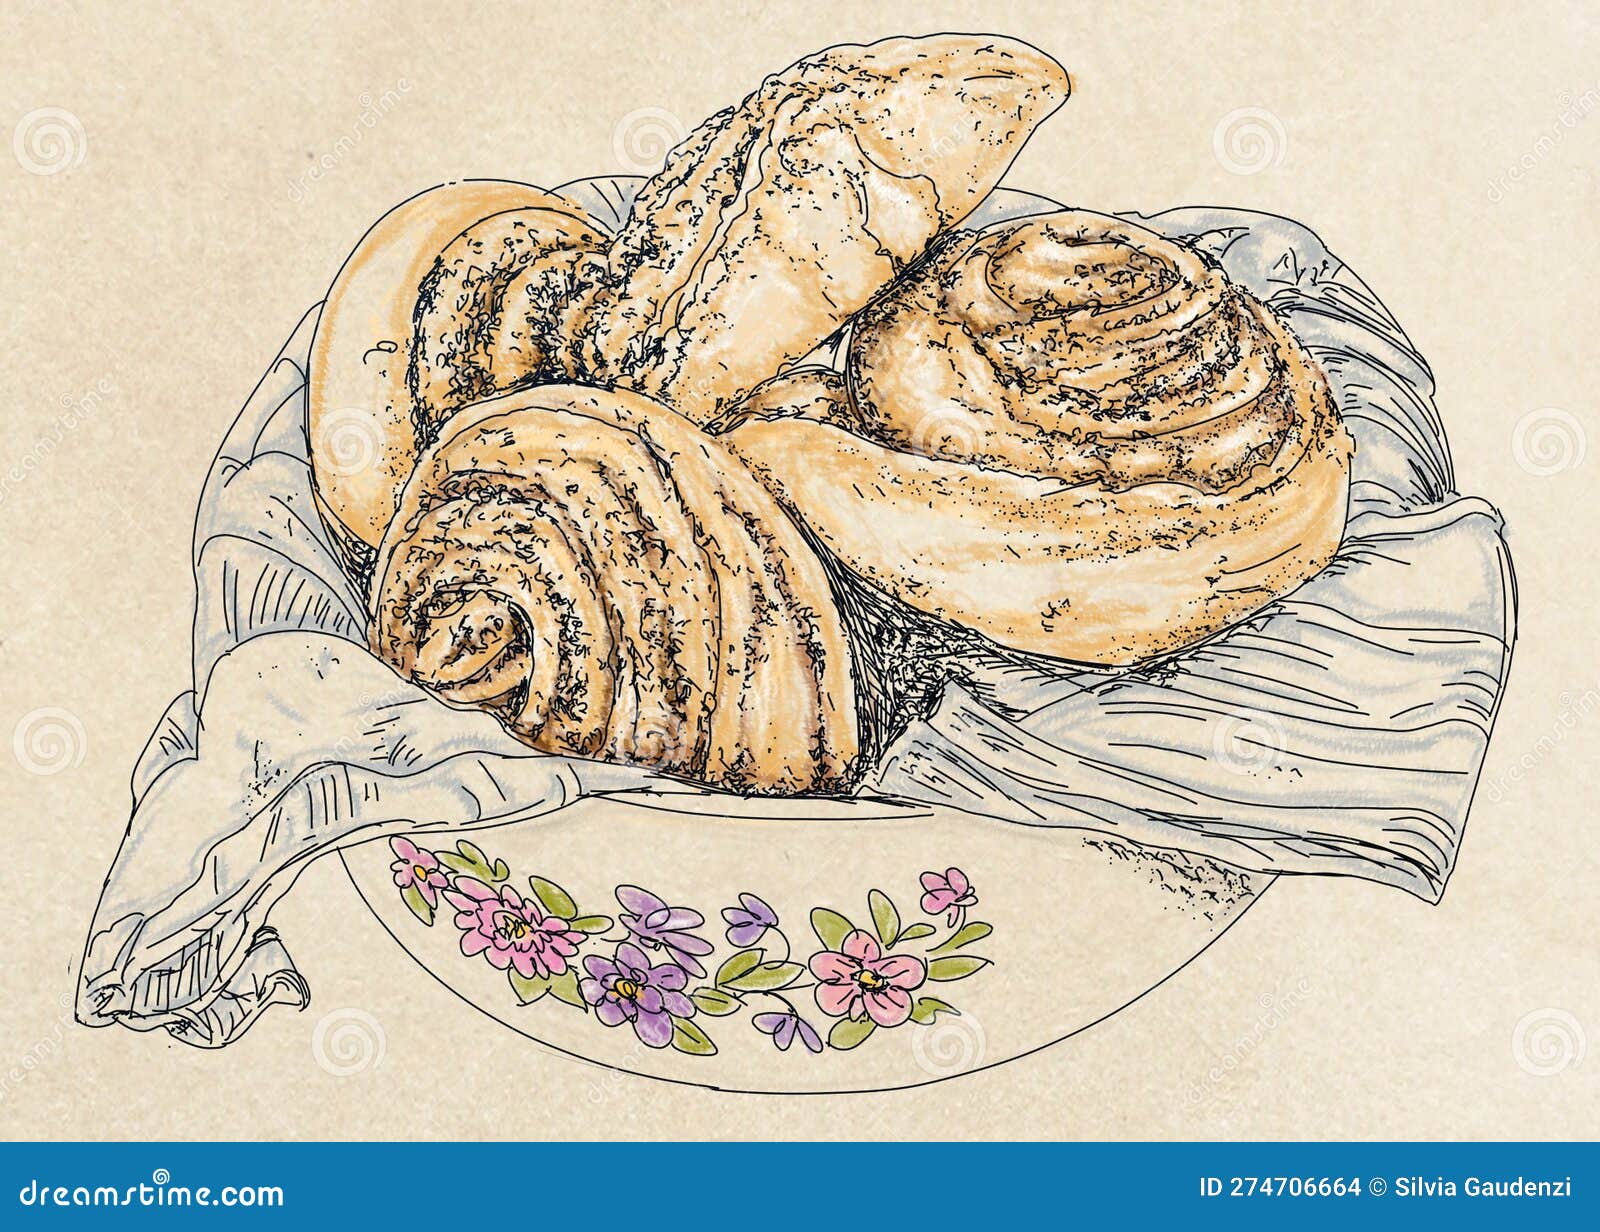 hand drawn sketch of buns with poppy seeds.  . vintage style.